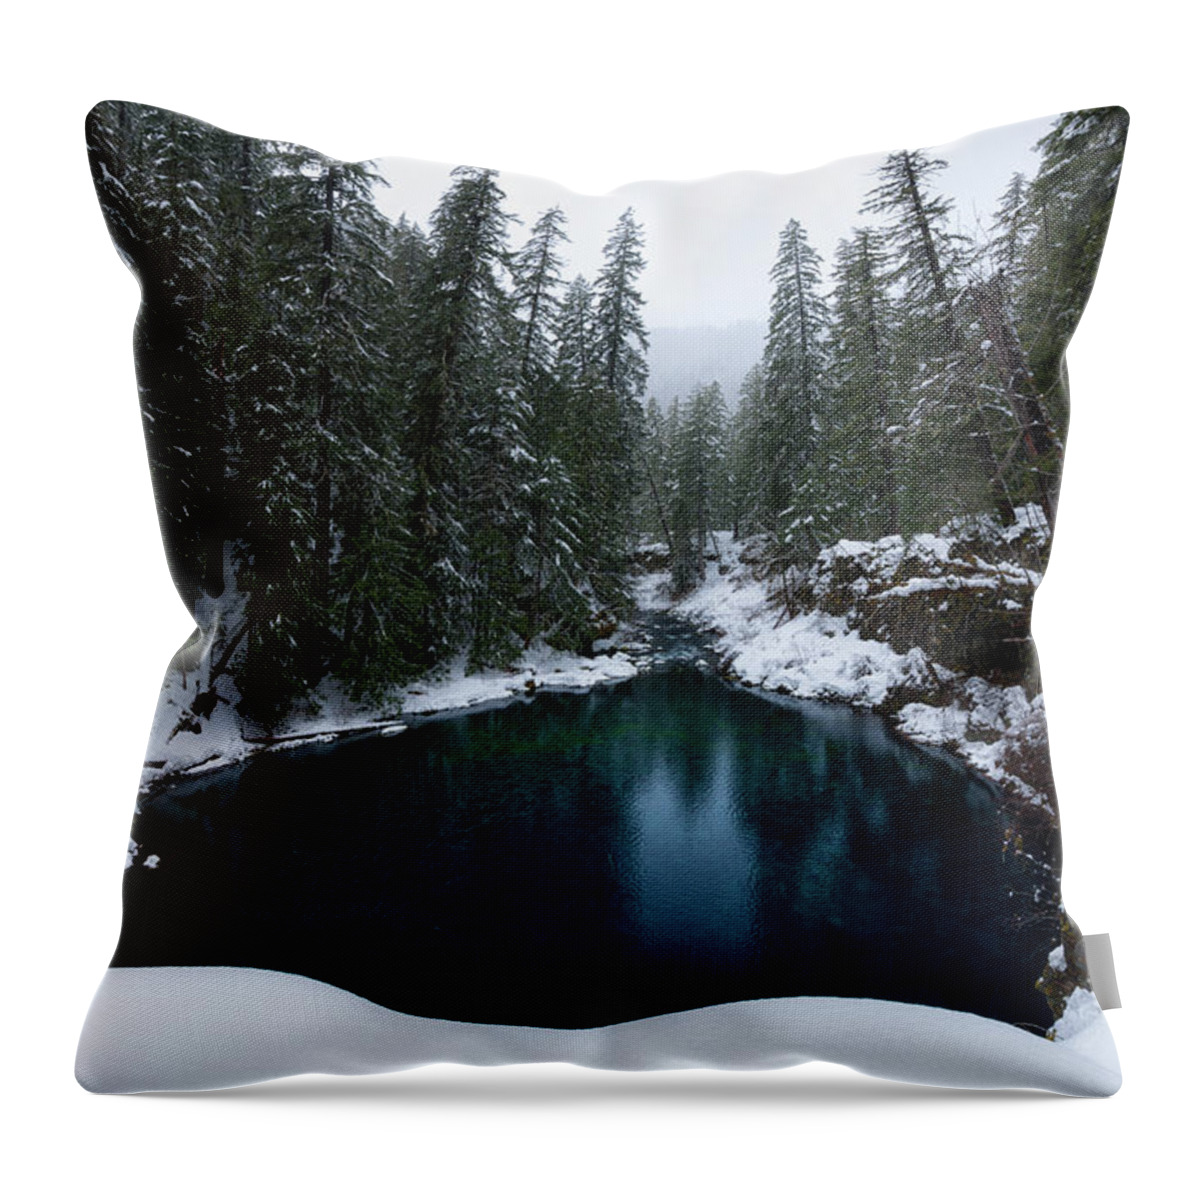 Mckenzie Throw Pillow featuring the photograph Tamolitch Pool by Andrew Kumler